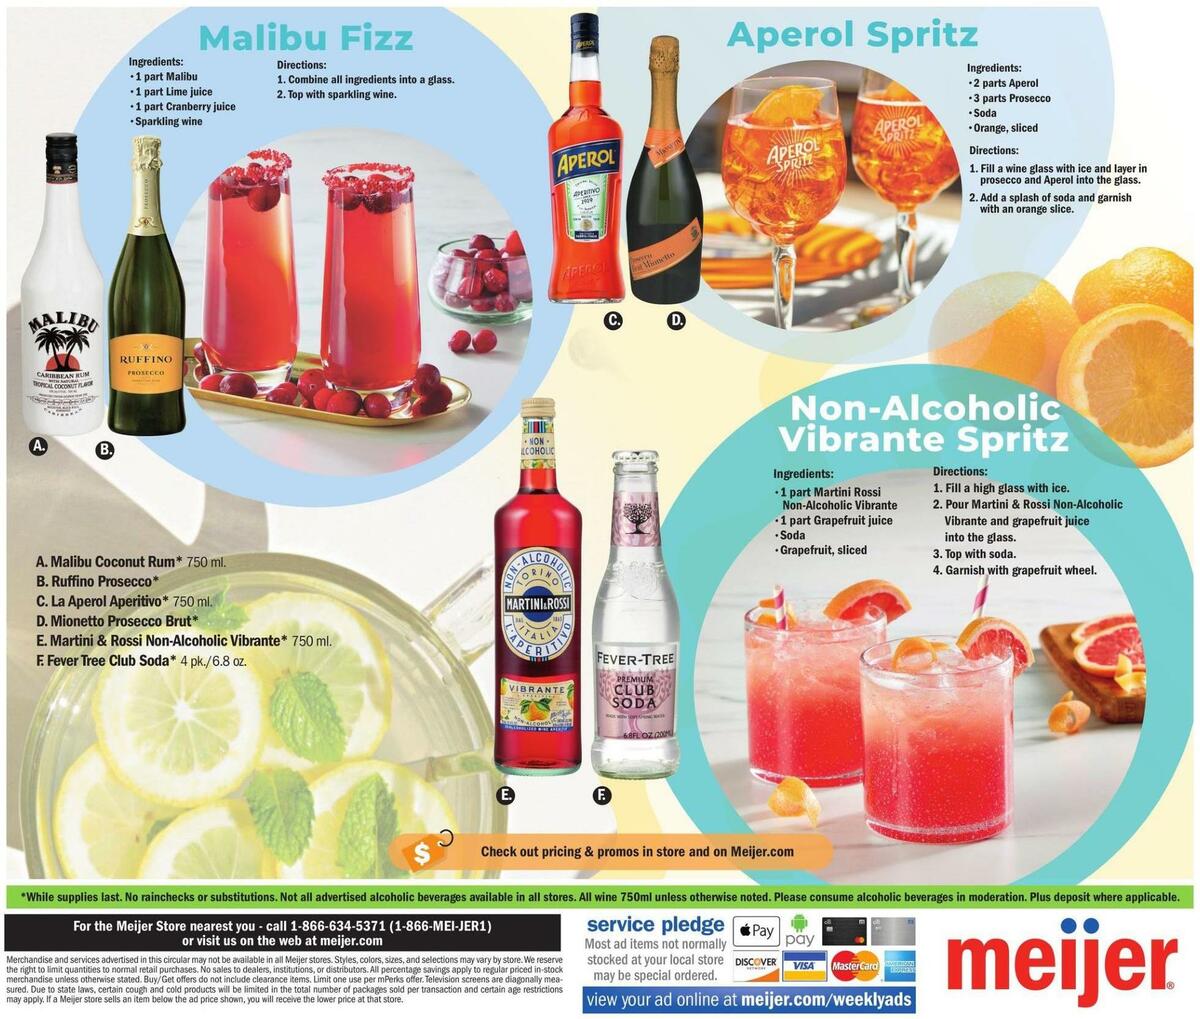 Meijer Alcohol Weekly Ad from May 21